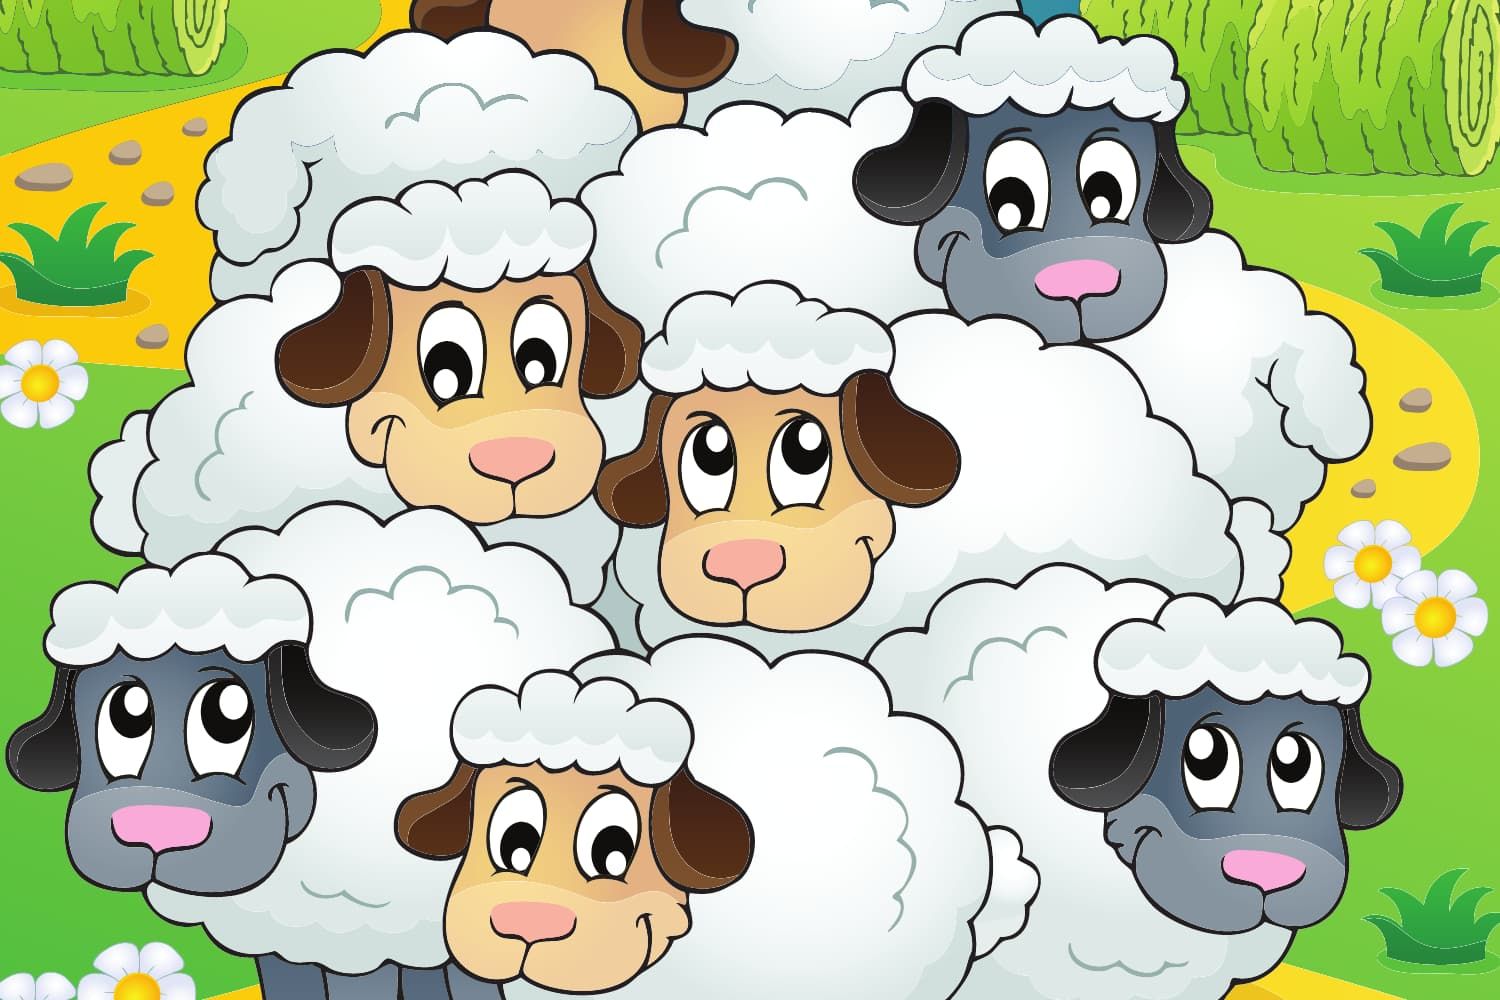 Game%20-%20NT%20Parable%20of%20the%20lost%20sheep%20-%20Count%20the%20sheep-b72376df Games